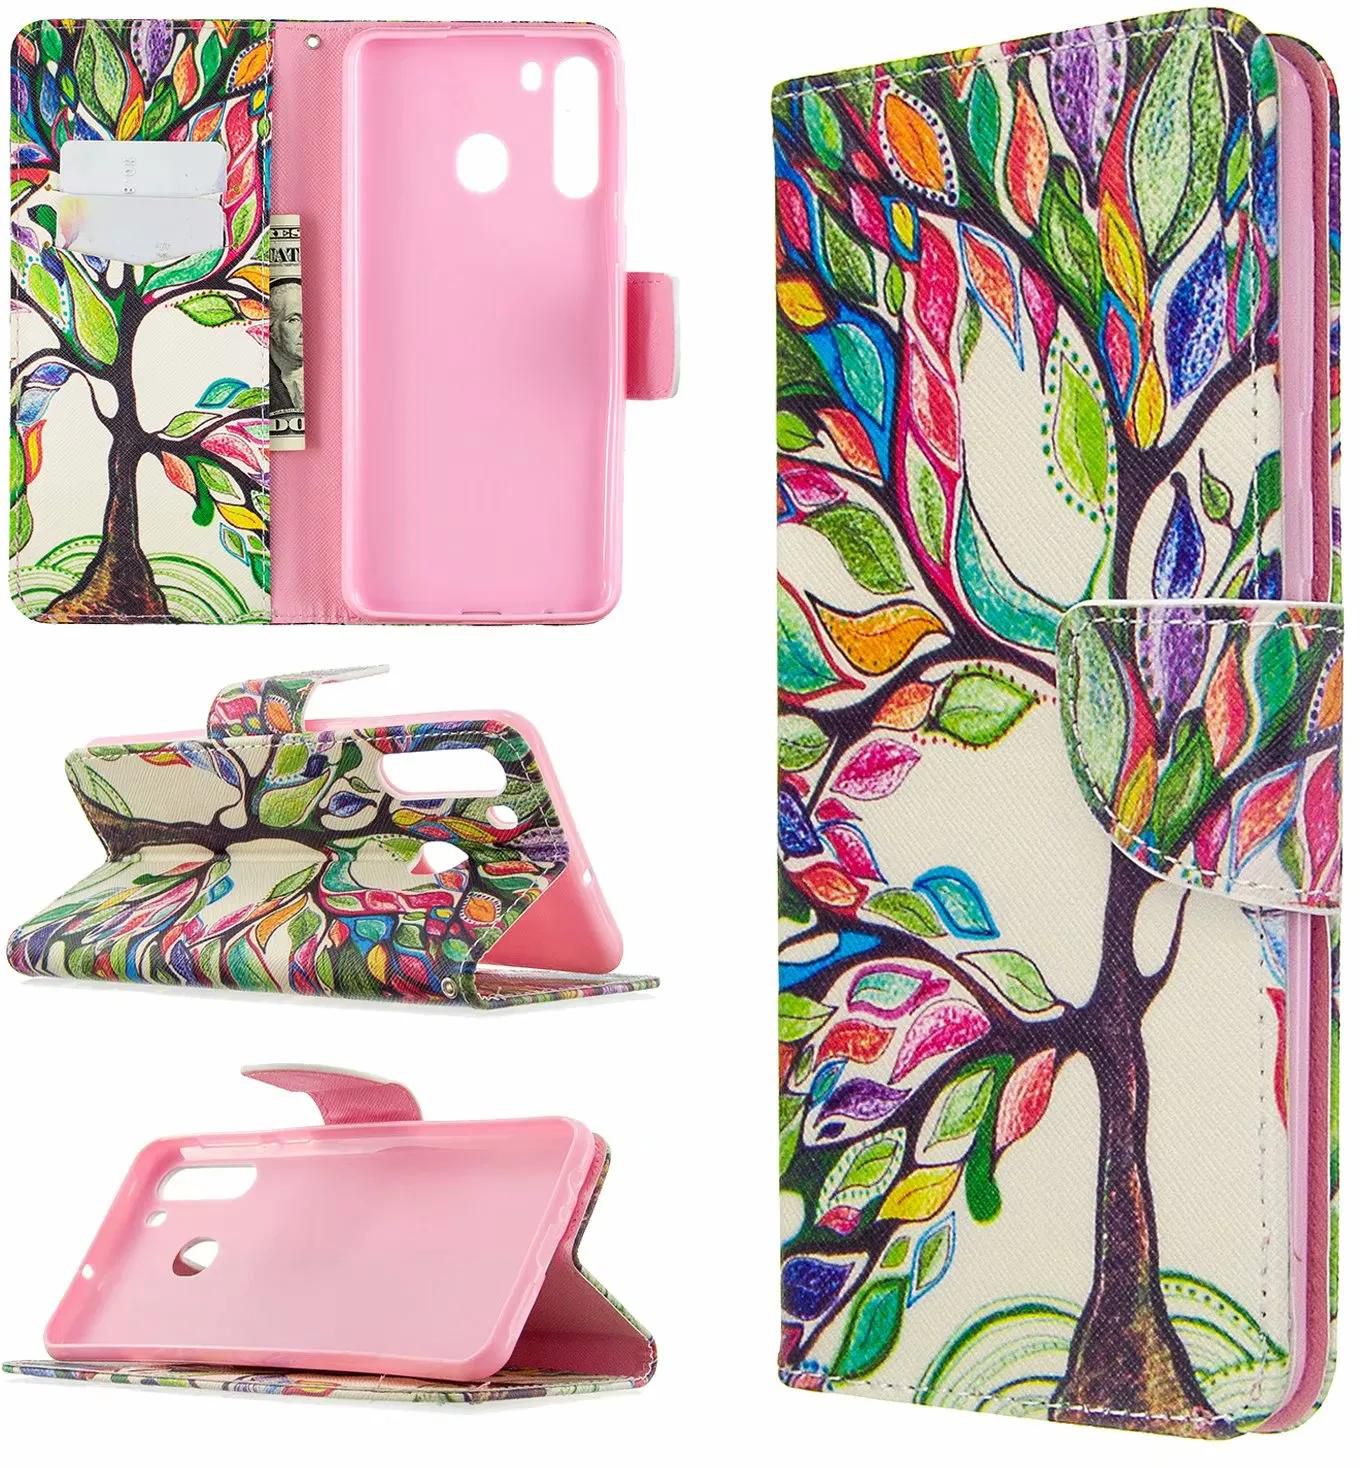 Samsung Galaxy A21 Case, Flip PU Leather Wallet Phone Bag Cover for Samsung A21 - Painting tree